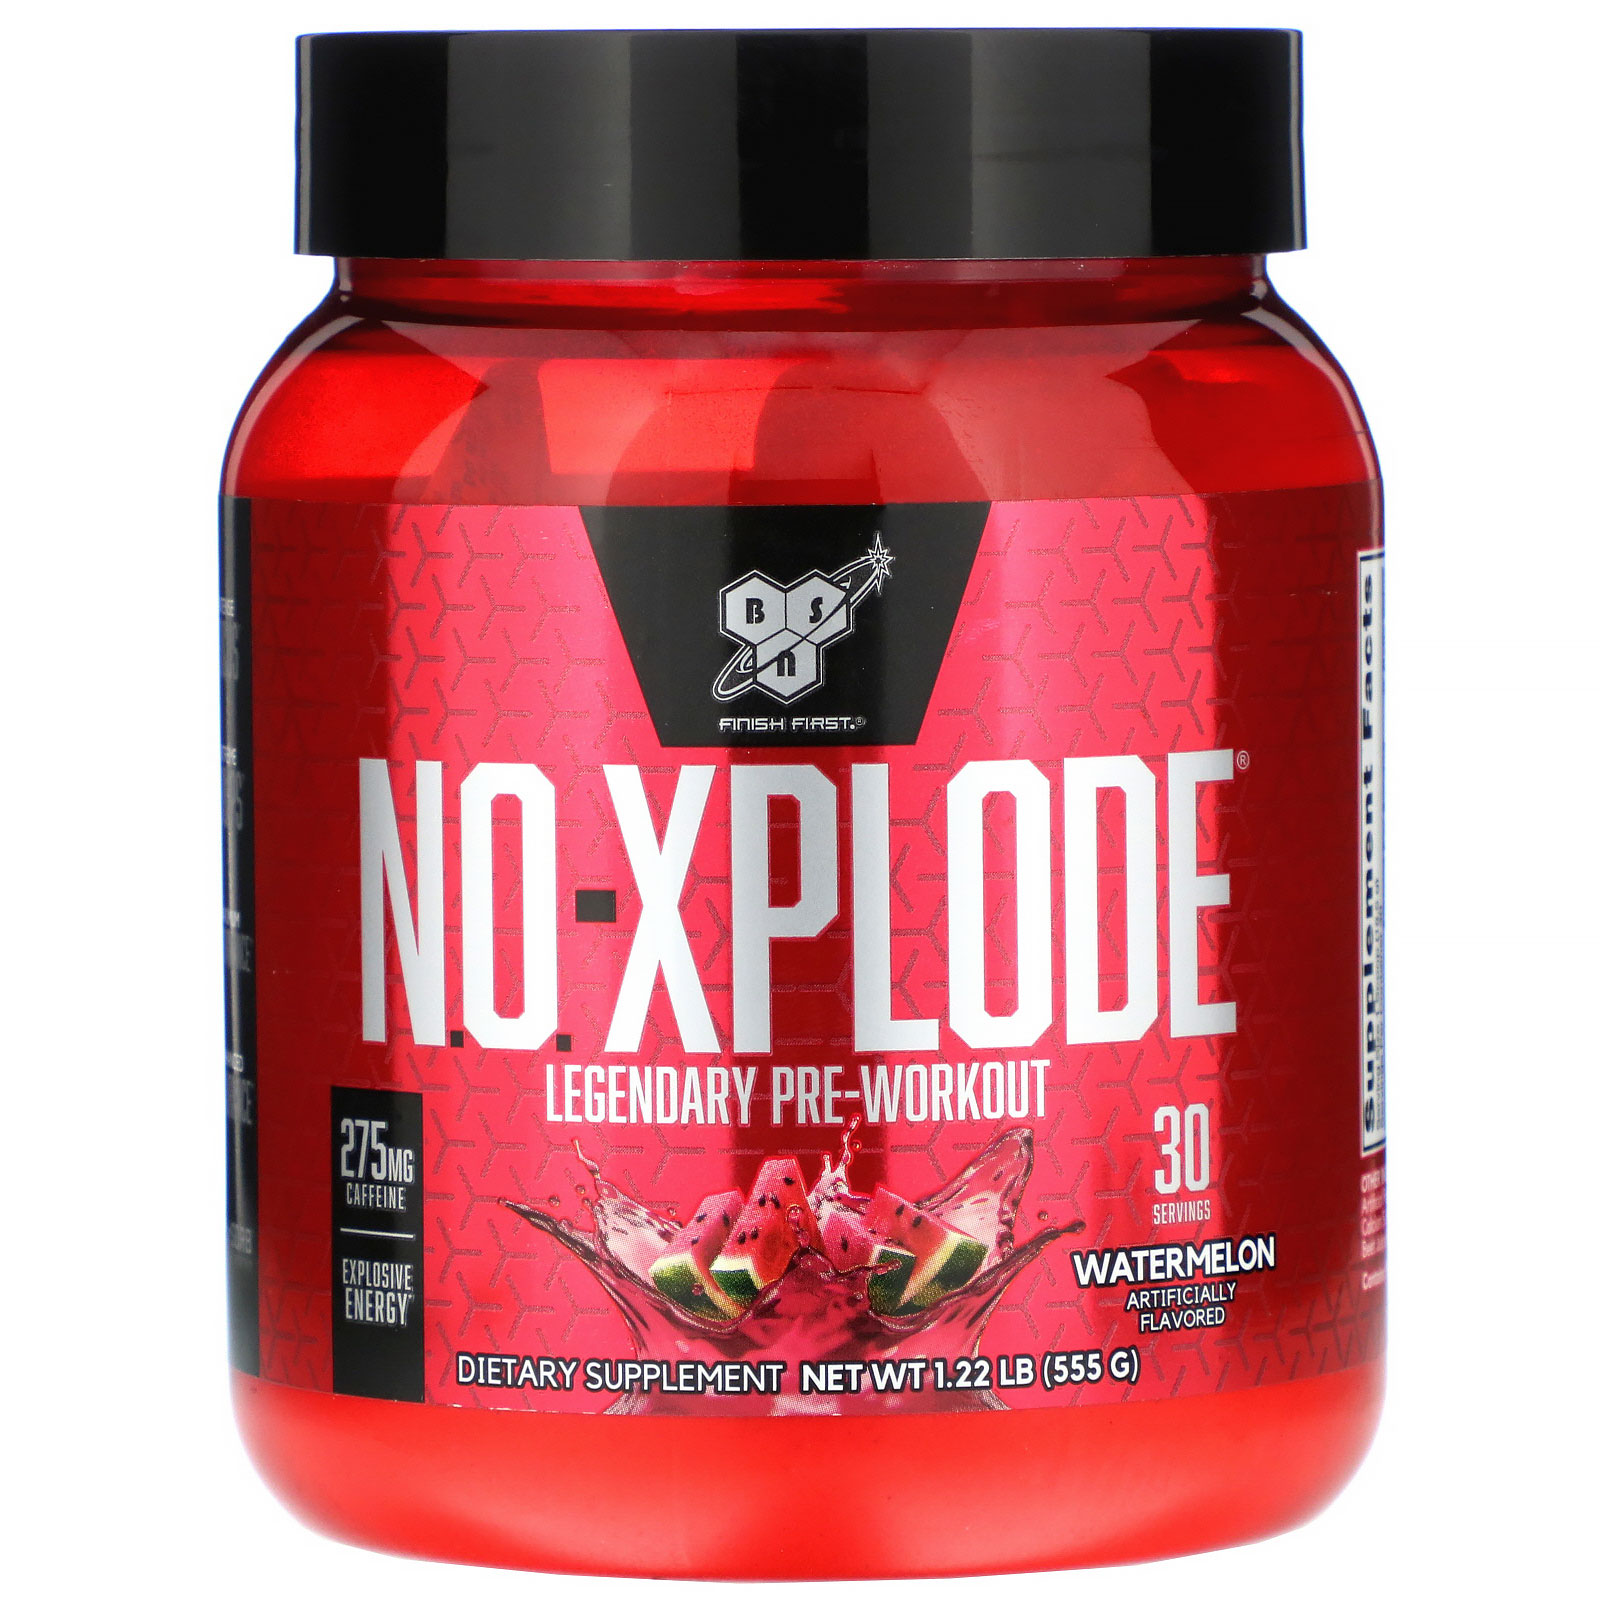 15 Minute No Xplode Legendary Pre Workout Review for push your ABS